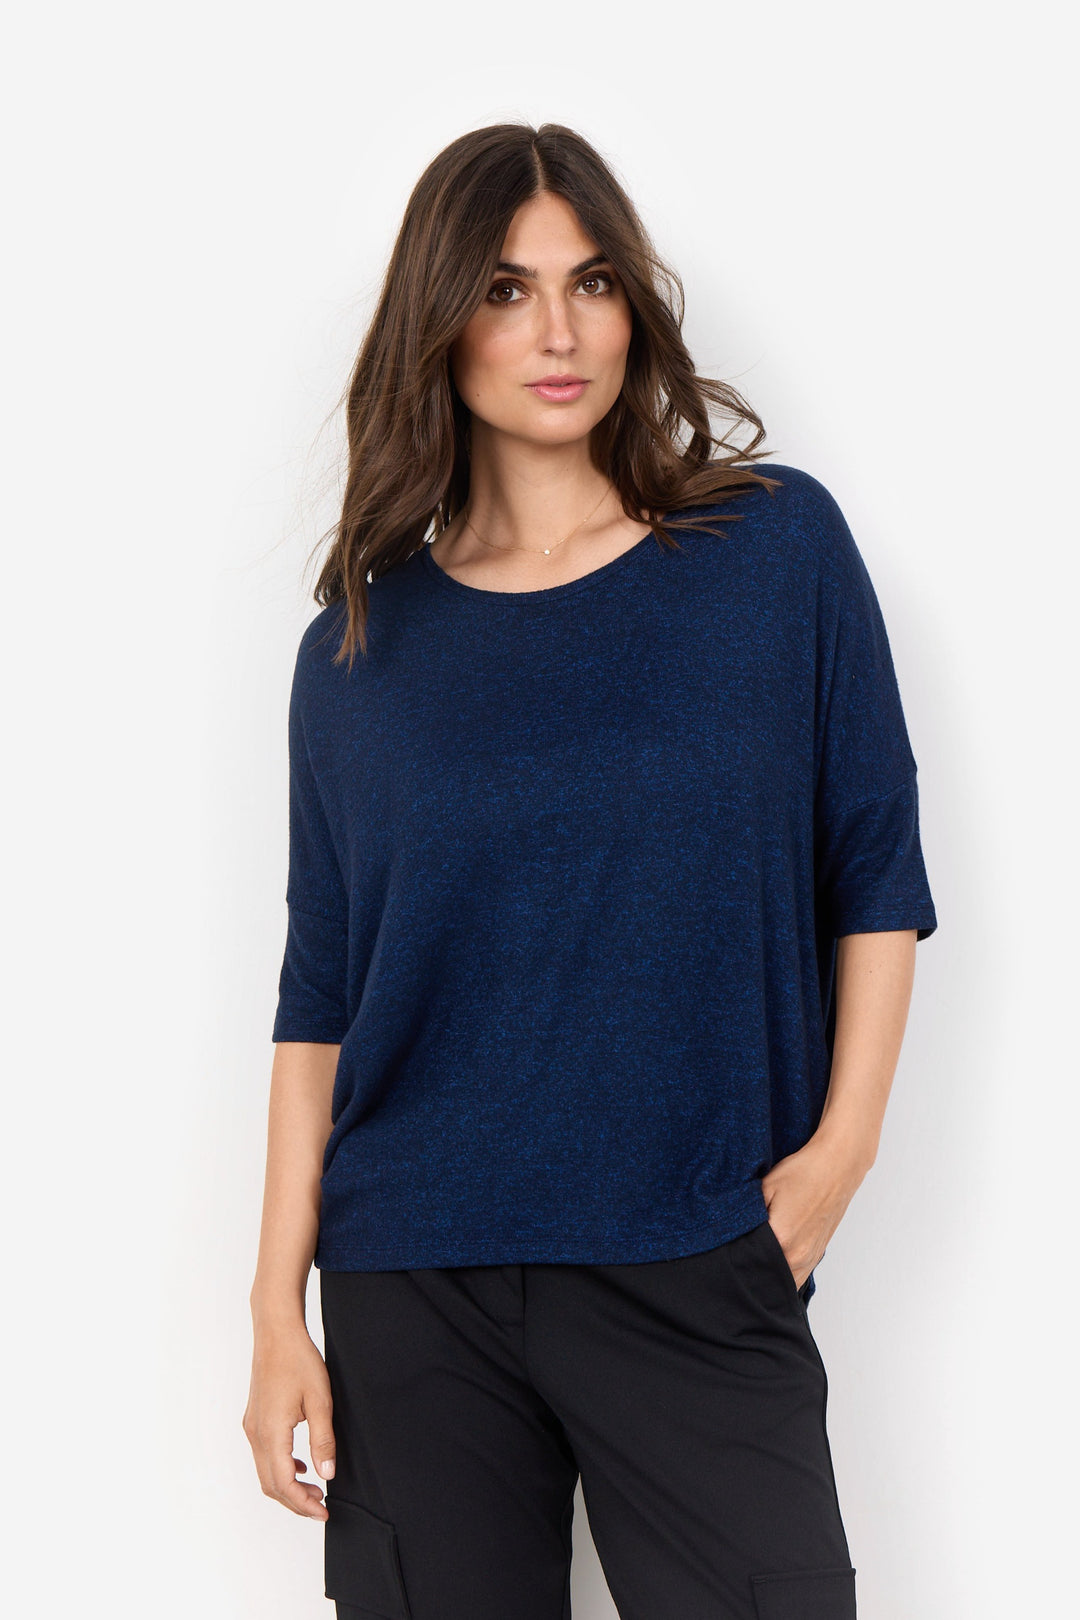 Soya Concept Fall 2024 Its 3/4 length dolman sleeves and round neckline provide a light and relaxed fit to be styled with anything from capris to sweatpants.